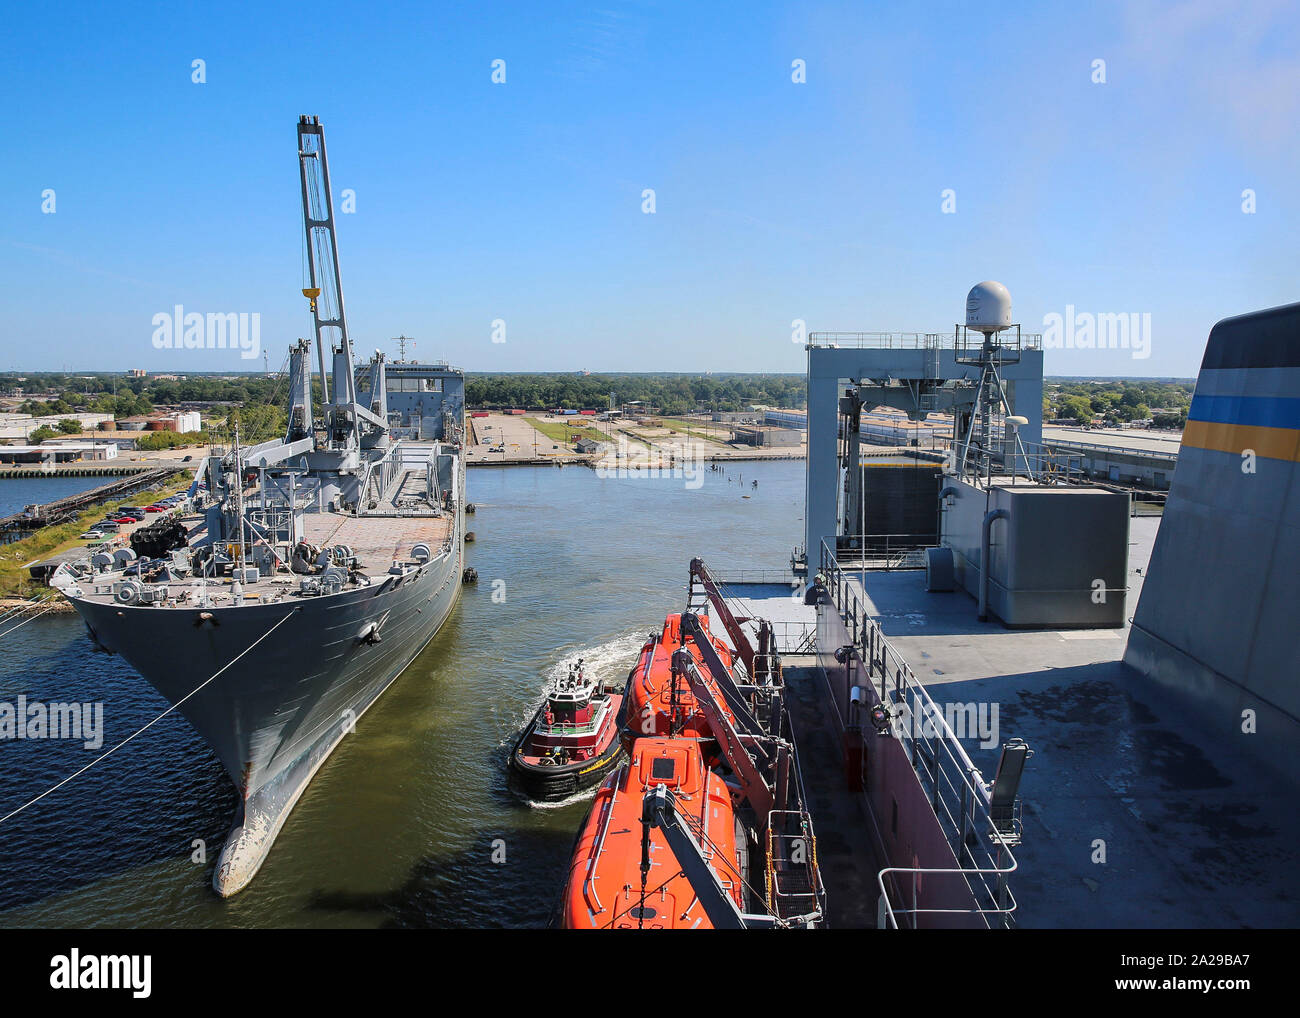 190921-N-BI294-9593  NORFOLK (Sept. 21, 2019) Military Sealift Command large, medium-speed roll-on/roll-off (LMSR) vessel USNS Benavidez (T-AKR 306), departs Lambert’s Point Shipyard alongside USNS Mendonca (T-AKR 303) for Turbo Activation. Turbo Activation is a large-scale sealift readiness exercise series, which rapidly activates a mix of Military Sealift Command and U.S. Department of Transportation’s Maritime Administration ships on the East, West, and Gulf Coasts. The exercise provides an assessment of the readiness of U.S. sealift forces, while also stressing the underlying support netwo Stock Photo